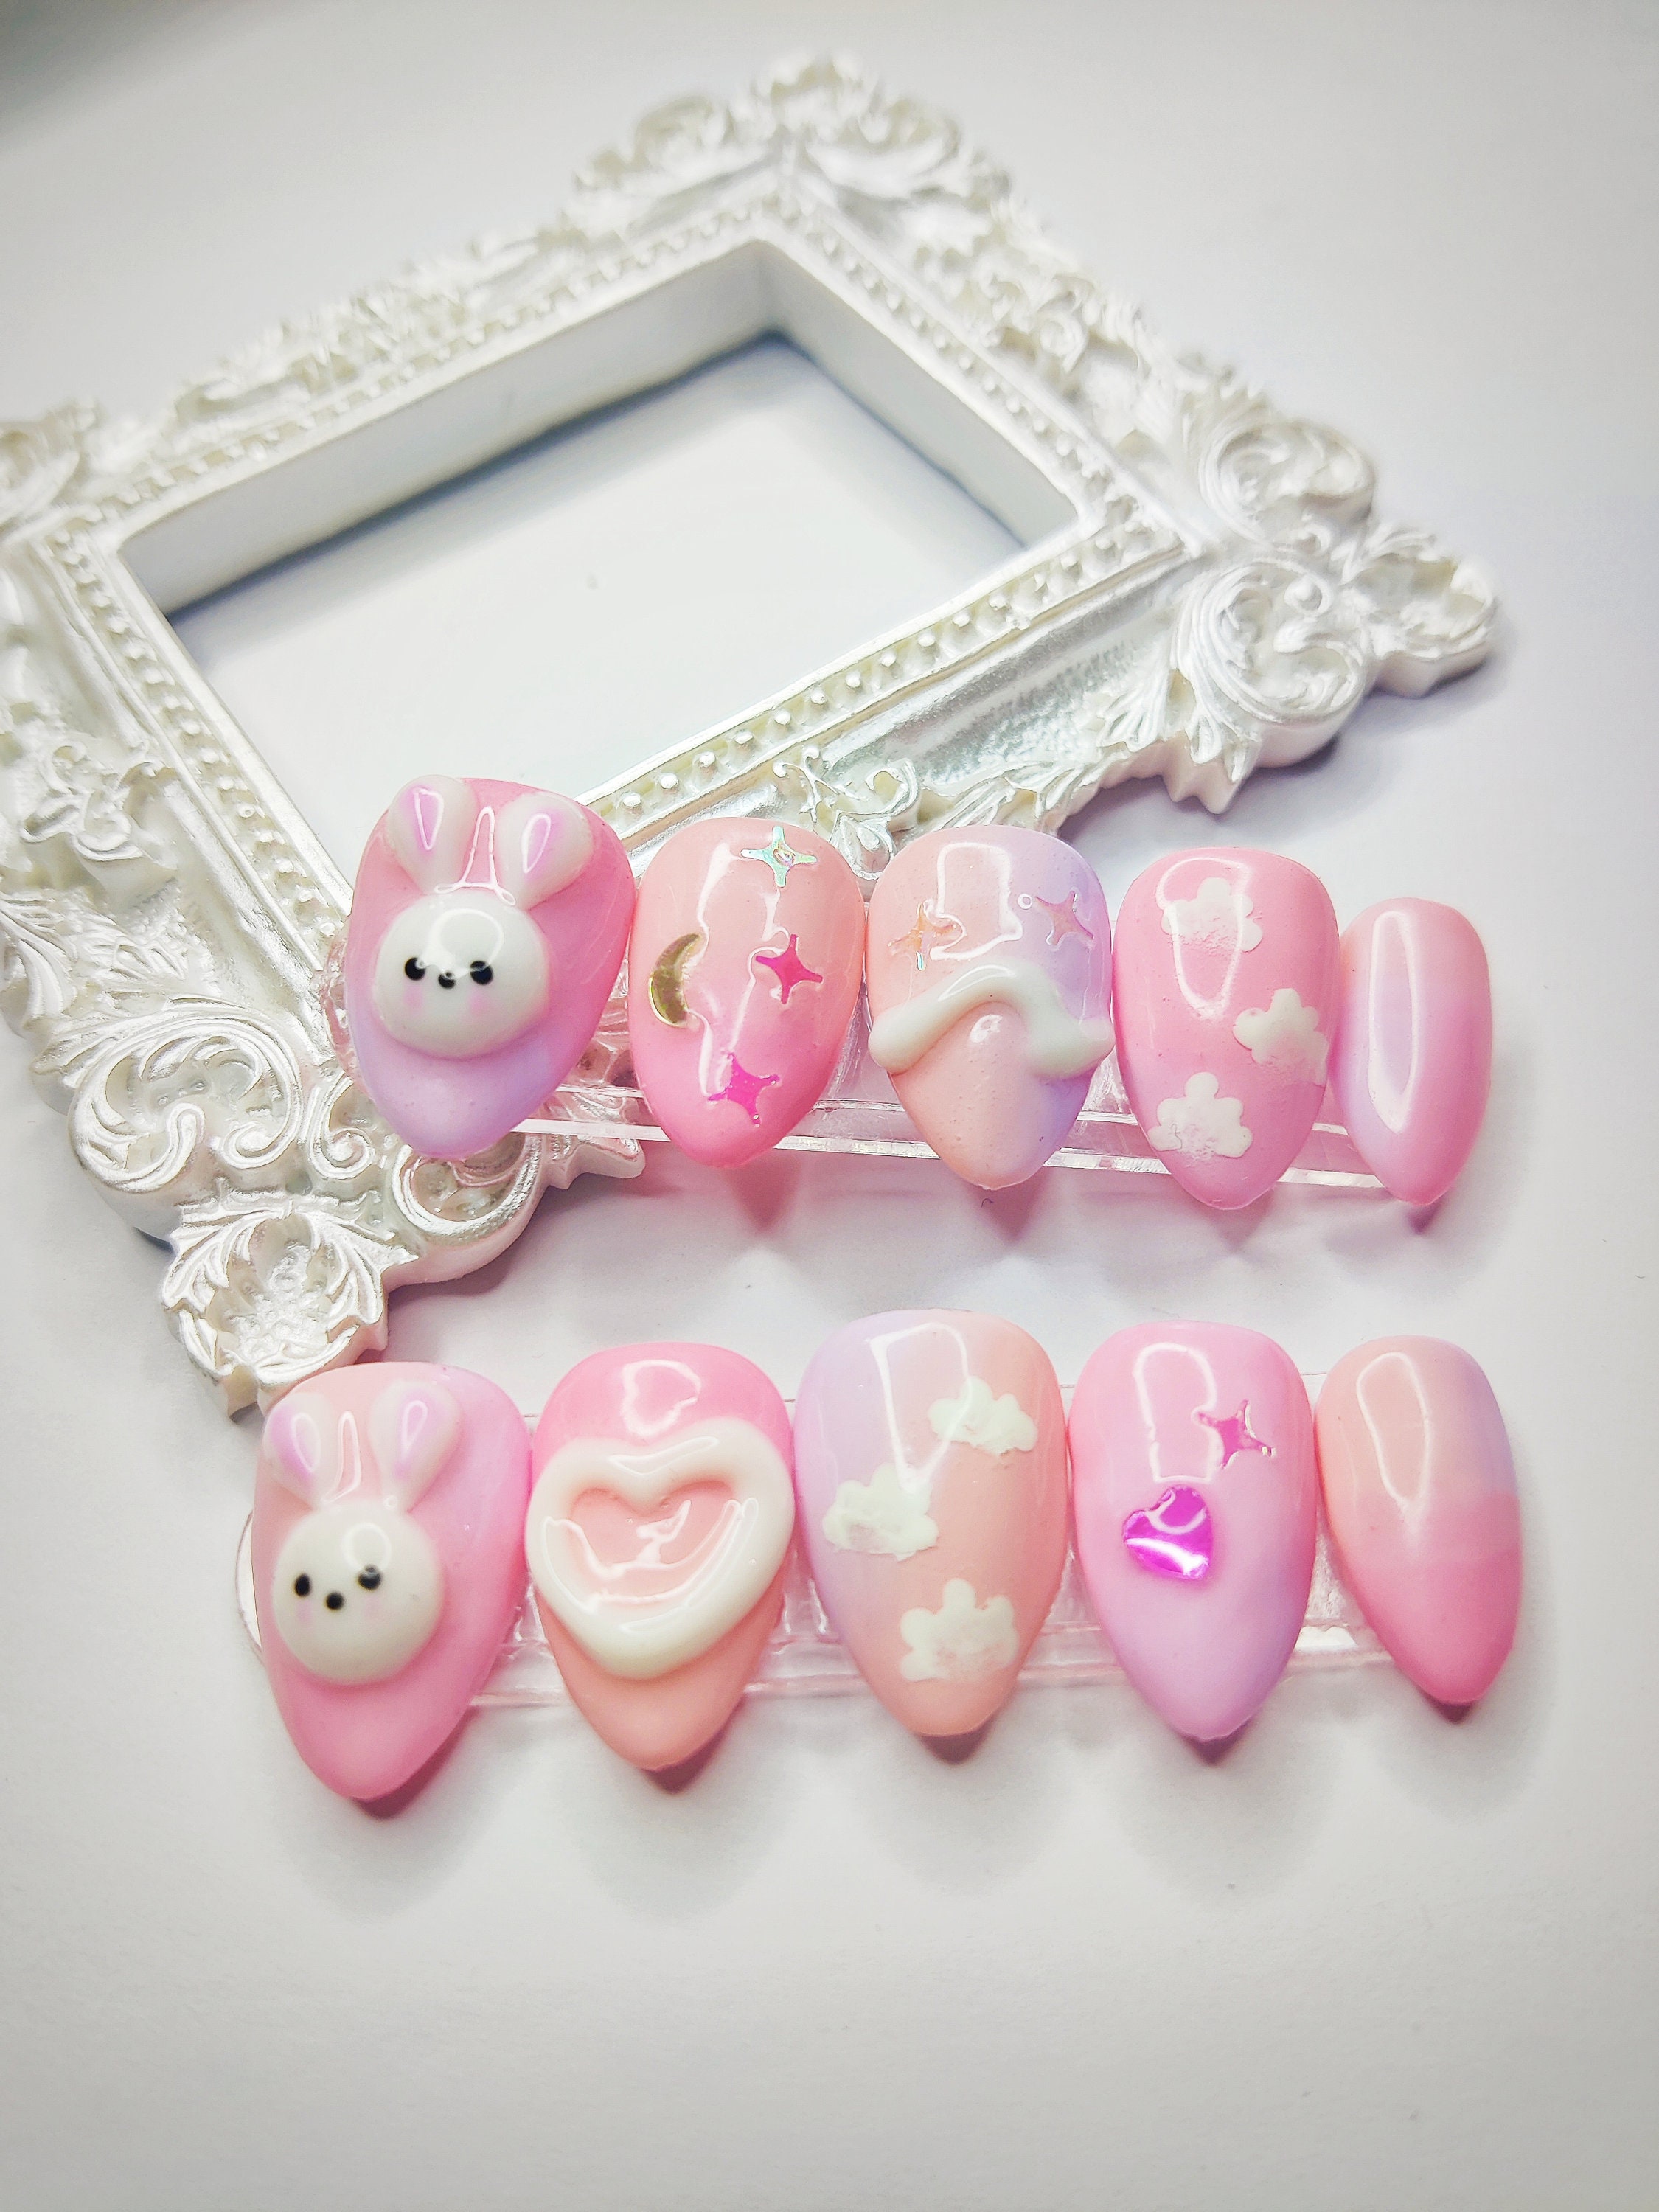 Pink and White Charm Press on Nails 